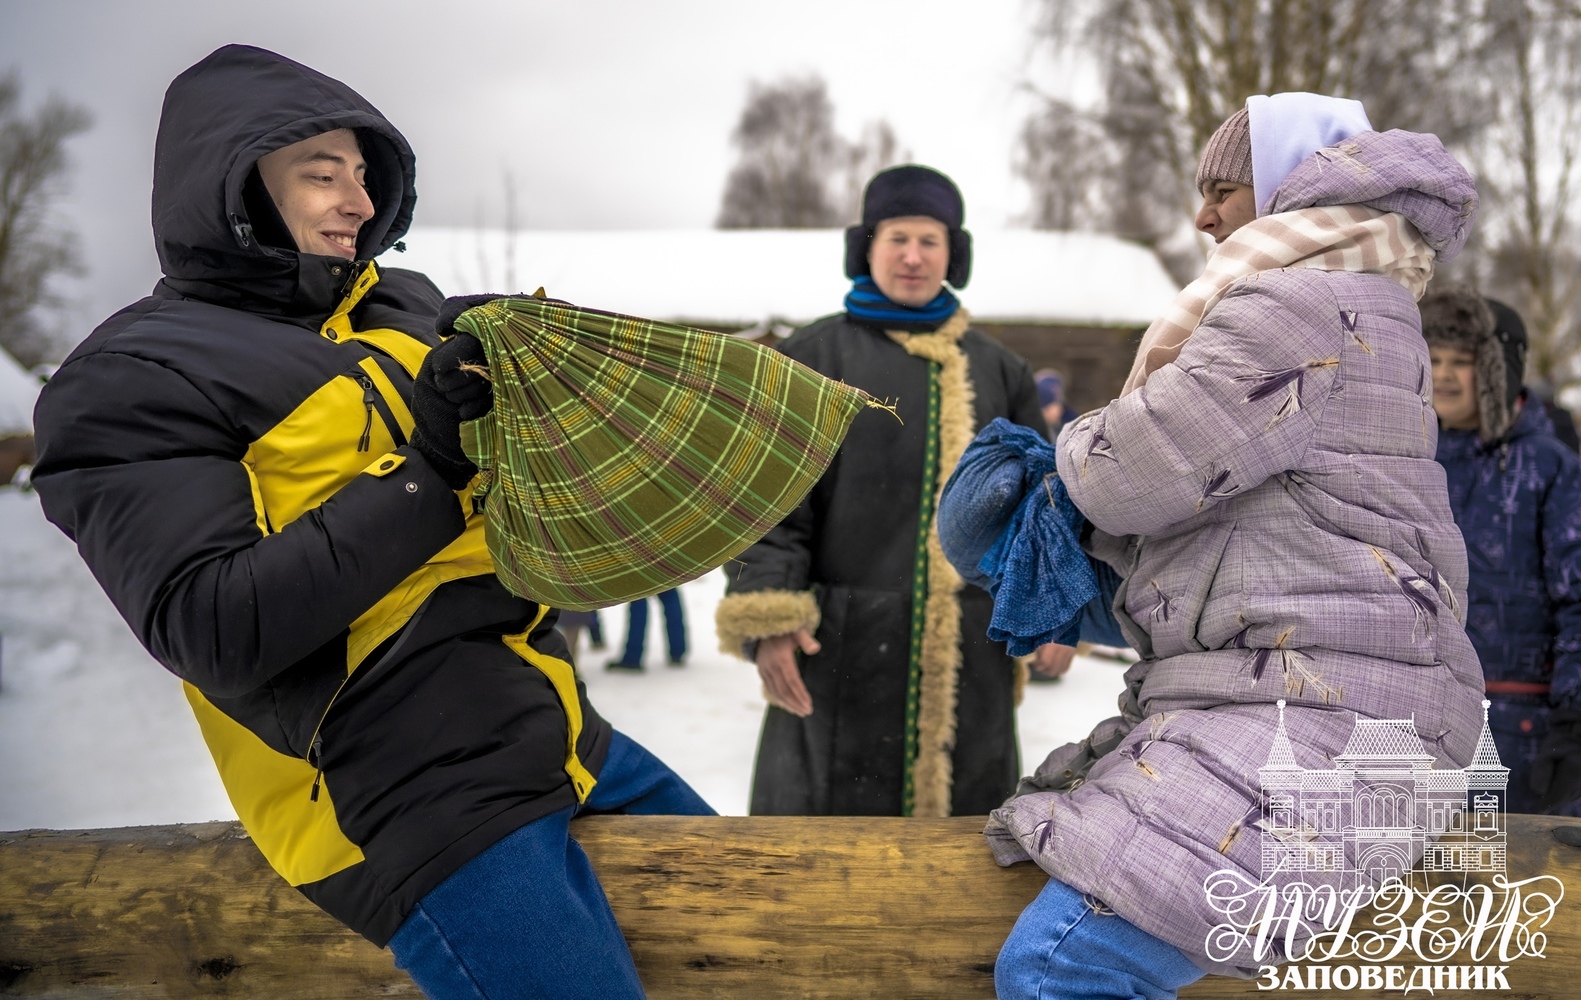 Maslenitsa was celebrated in Kostroma, as it was